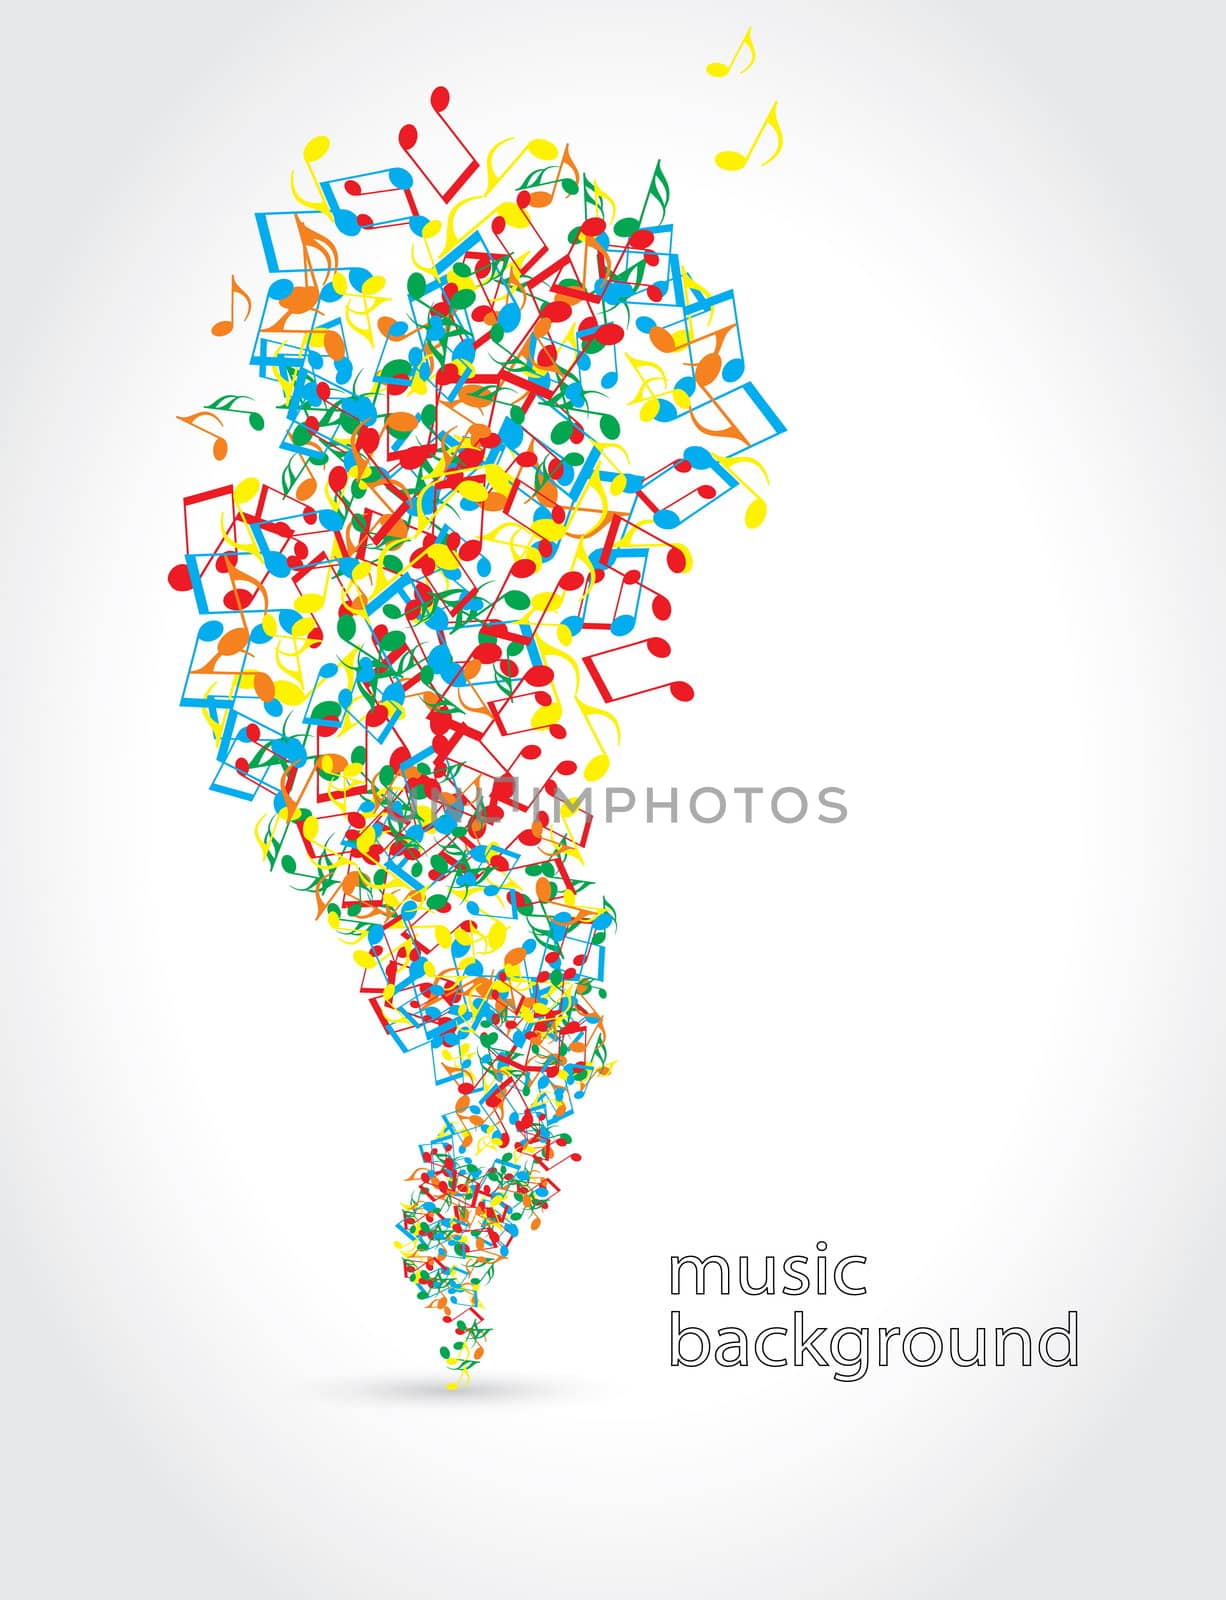 abstract music background with musical notes on white by svtrotof